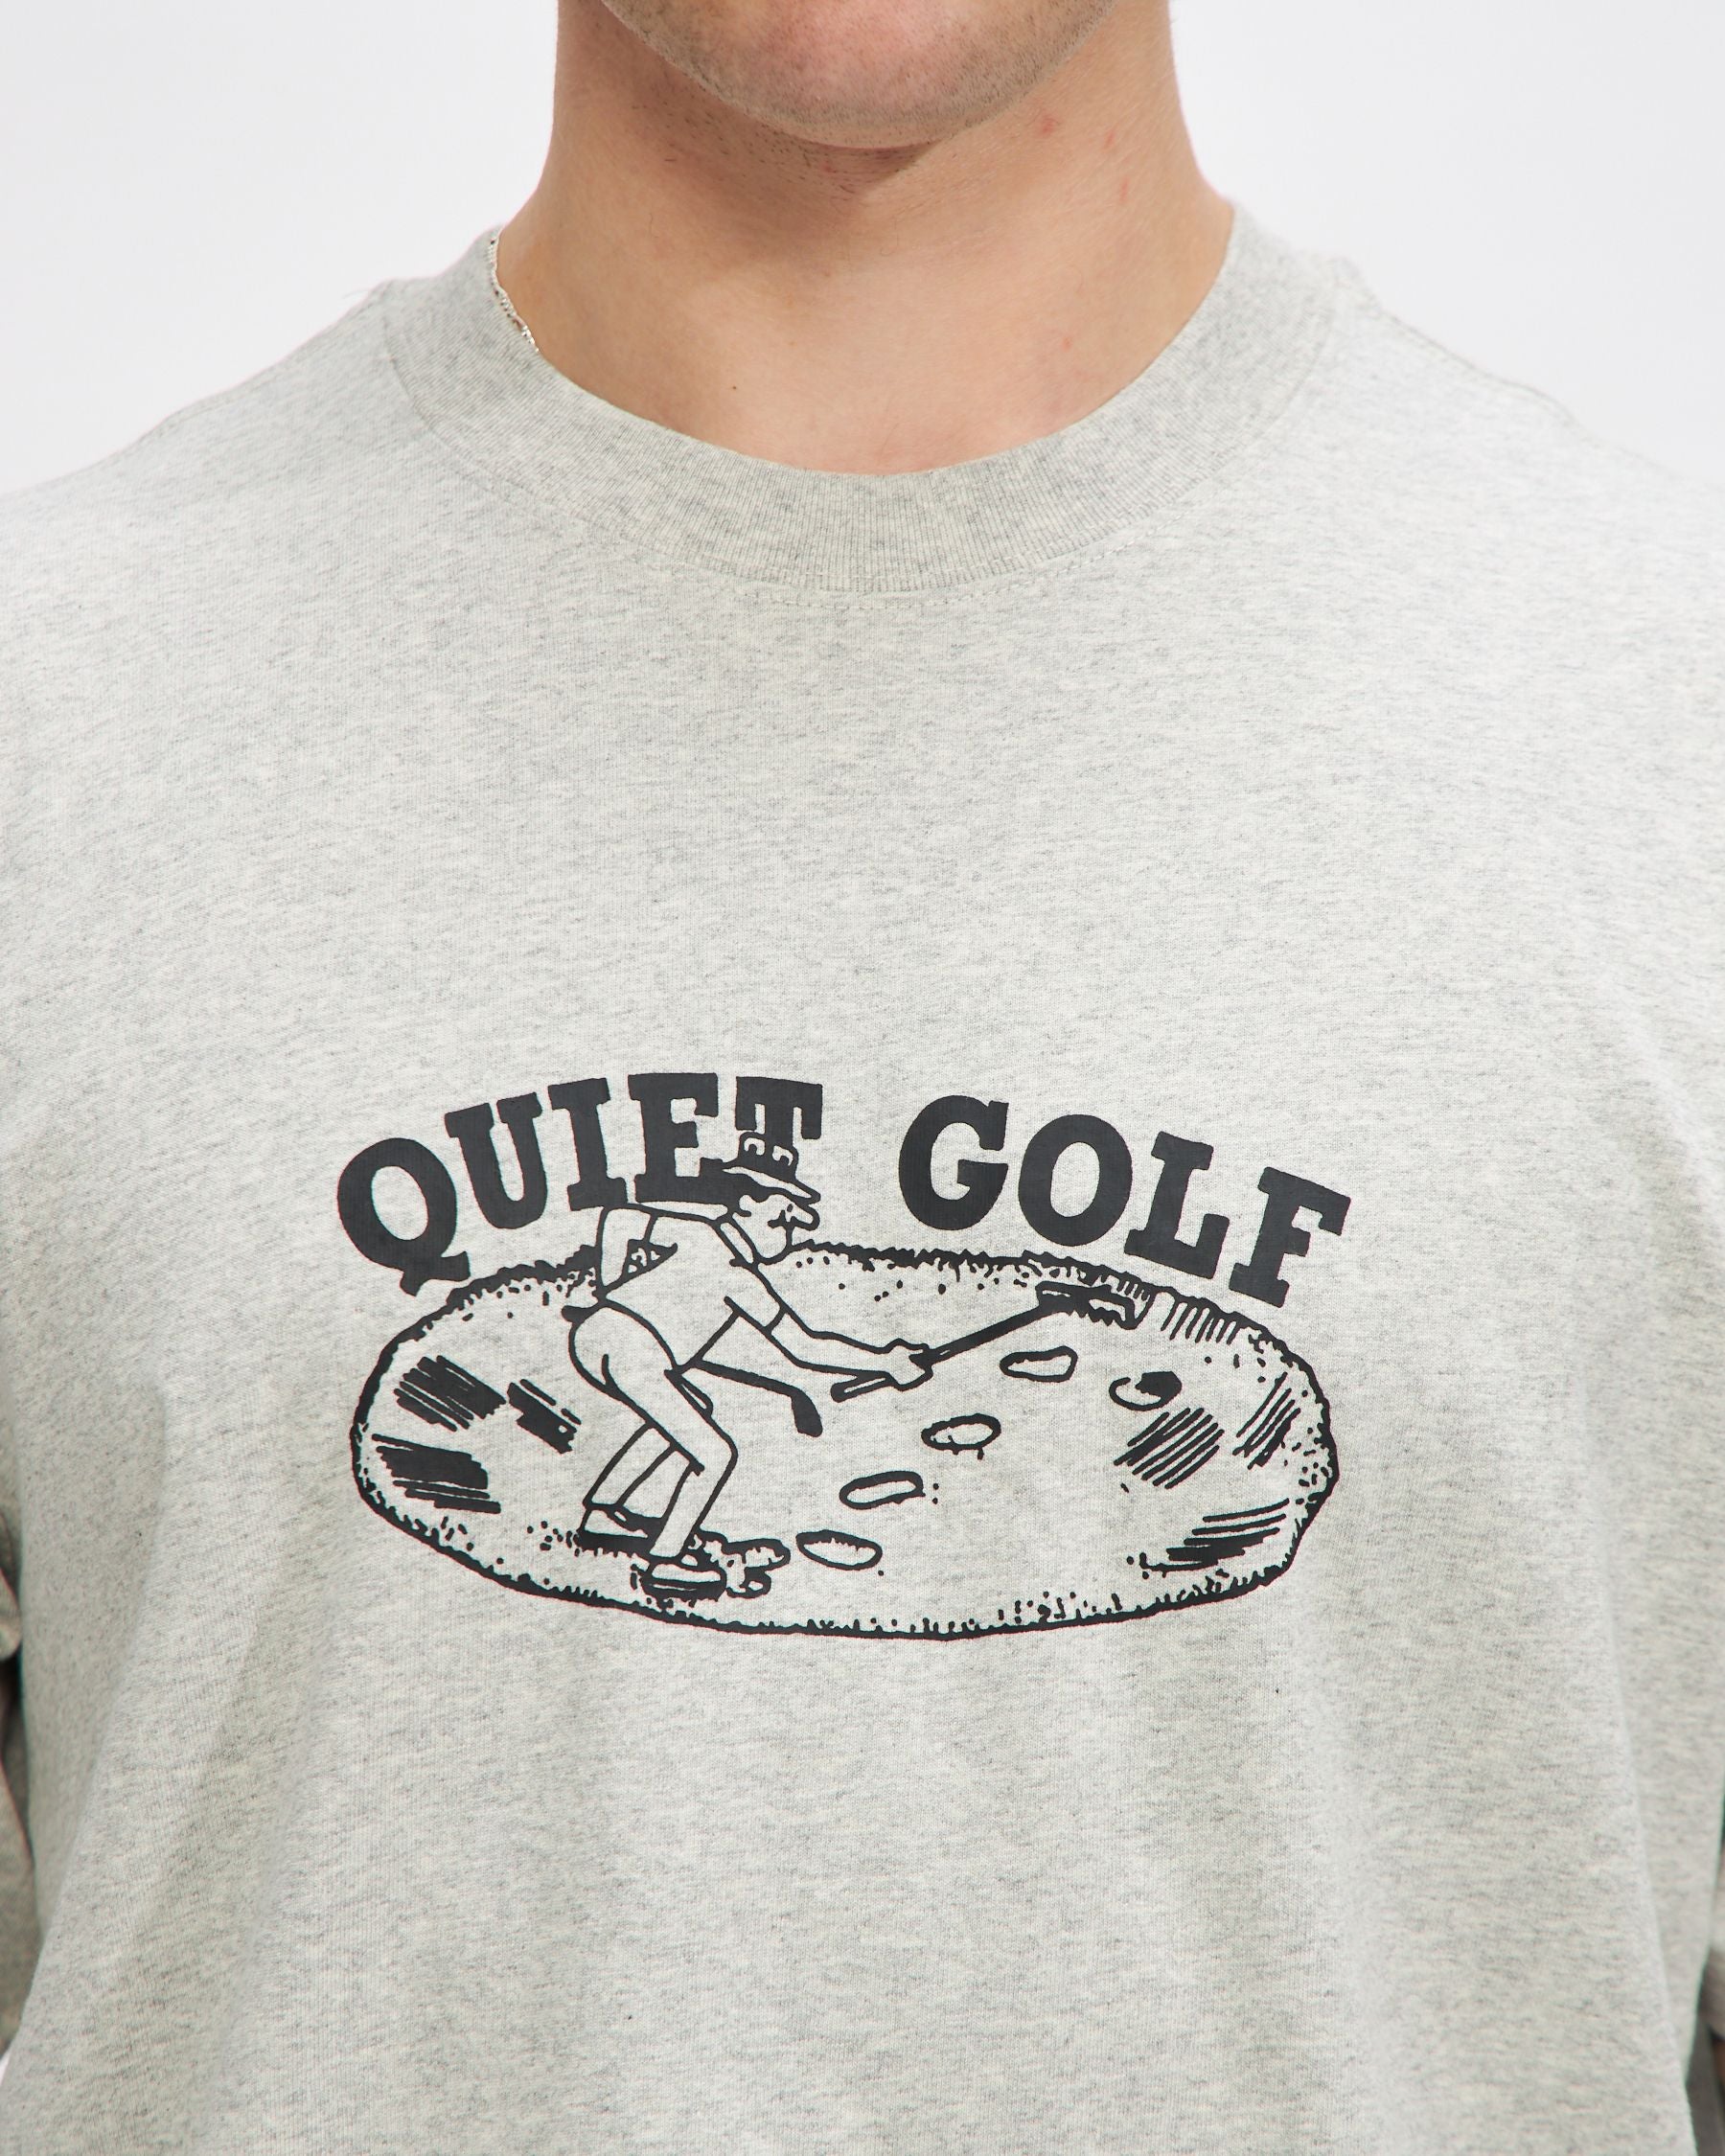 Bunkered T-Shirt in Heather